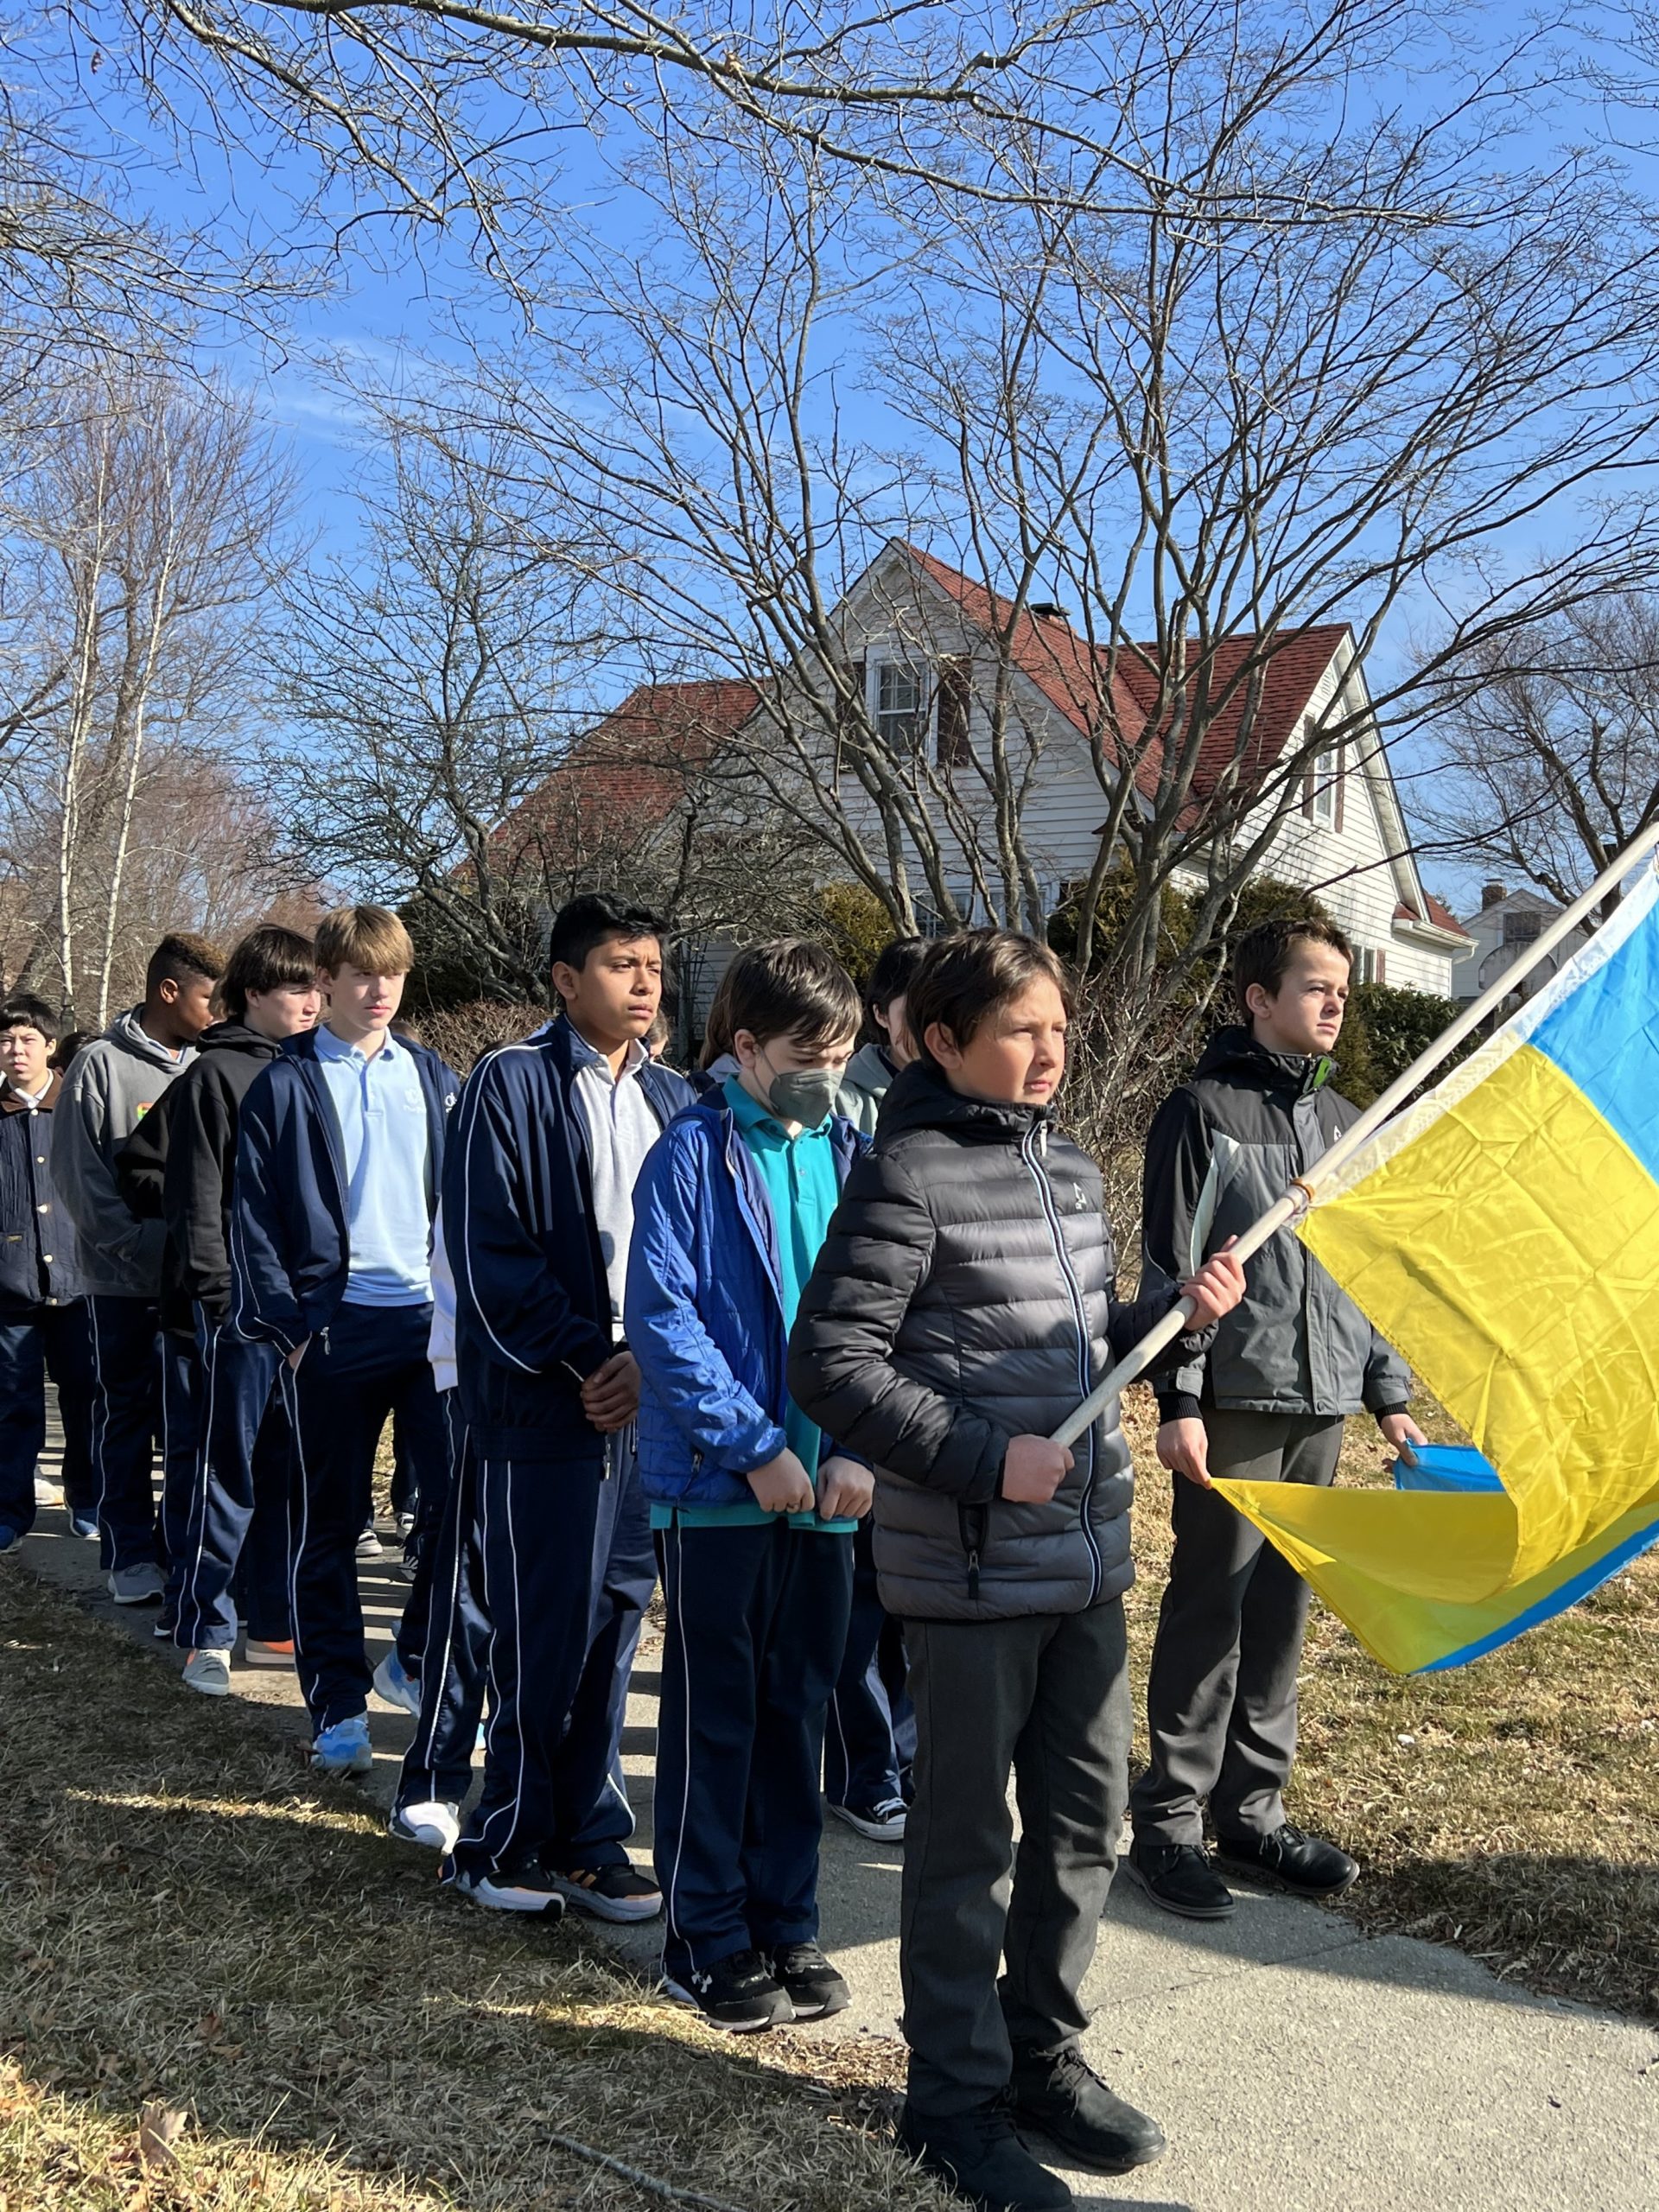 Our Lady of the Hamptons School Prep students participated in a peace procession in support of the people of Ukraine, marching to the Basilica on Ash Wednesday.